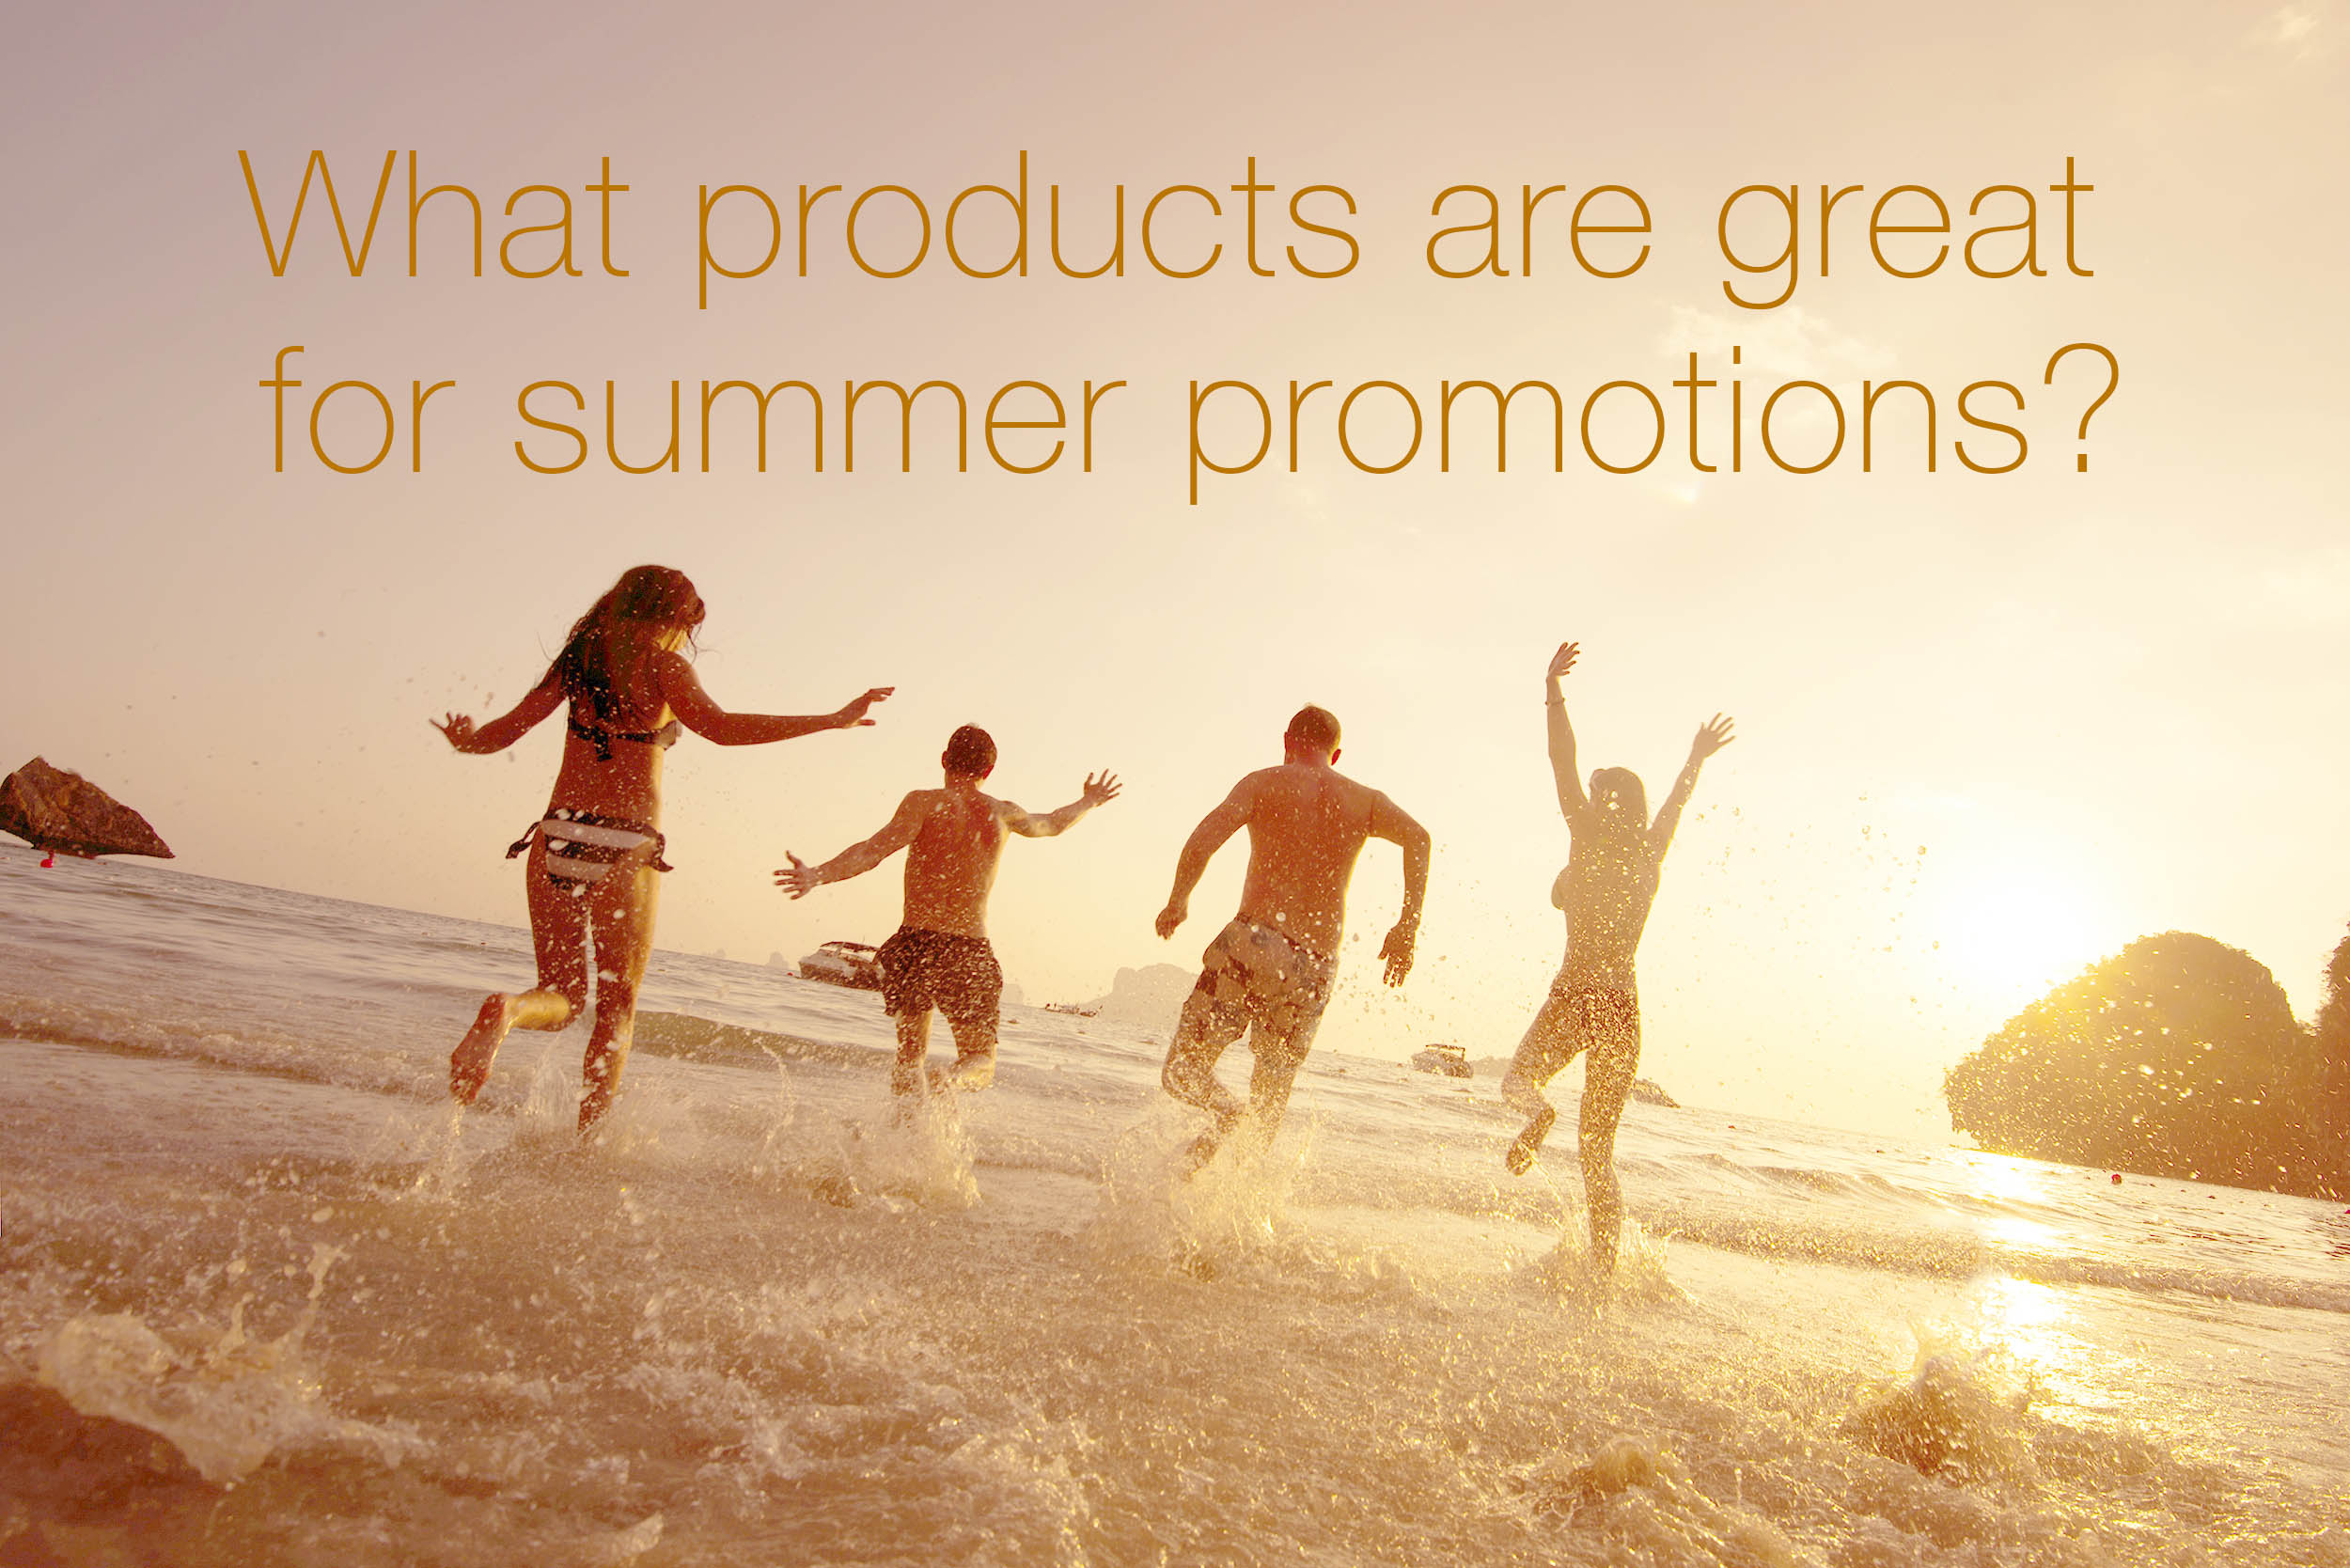 What products are great for summer promotions?